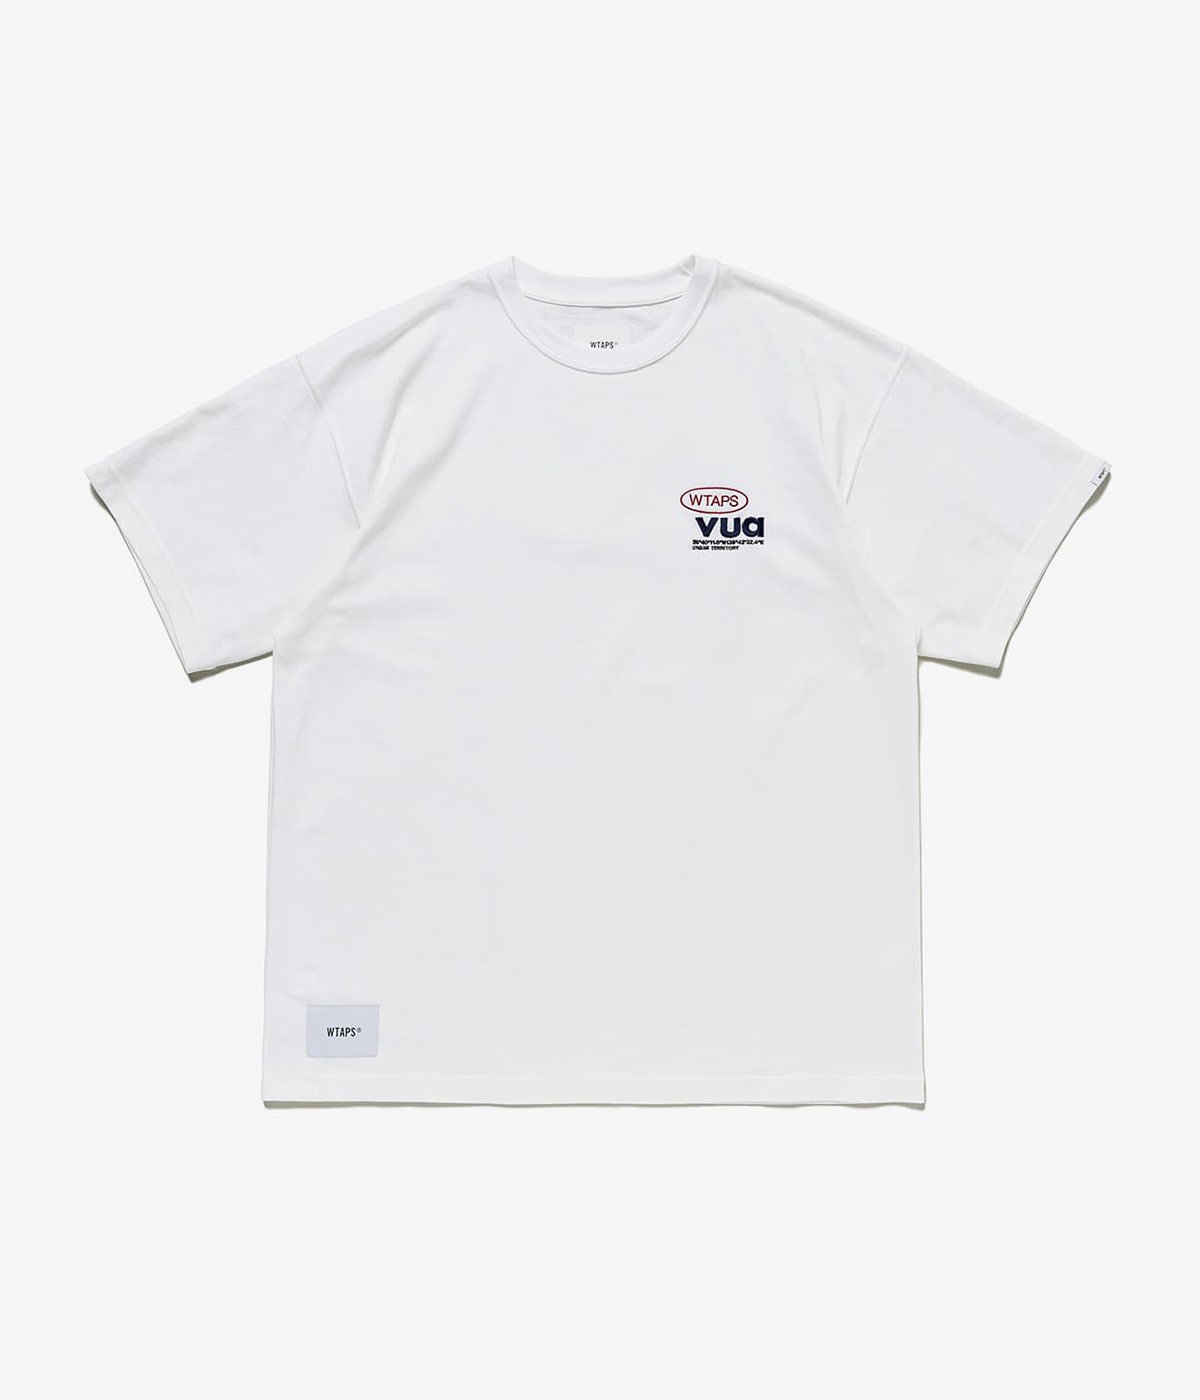 AII 02 / SS / COTTON. PROTECT | WTAPS(ダブルタップス) / トップス 